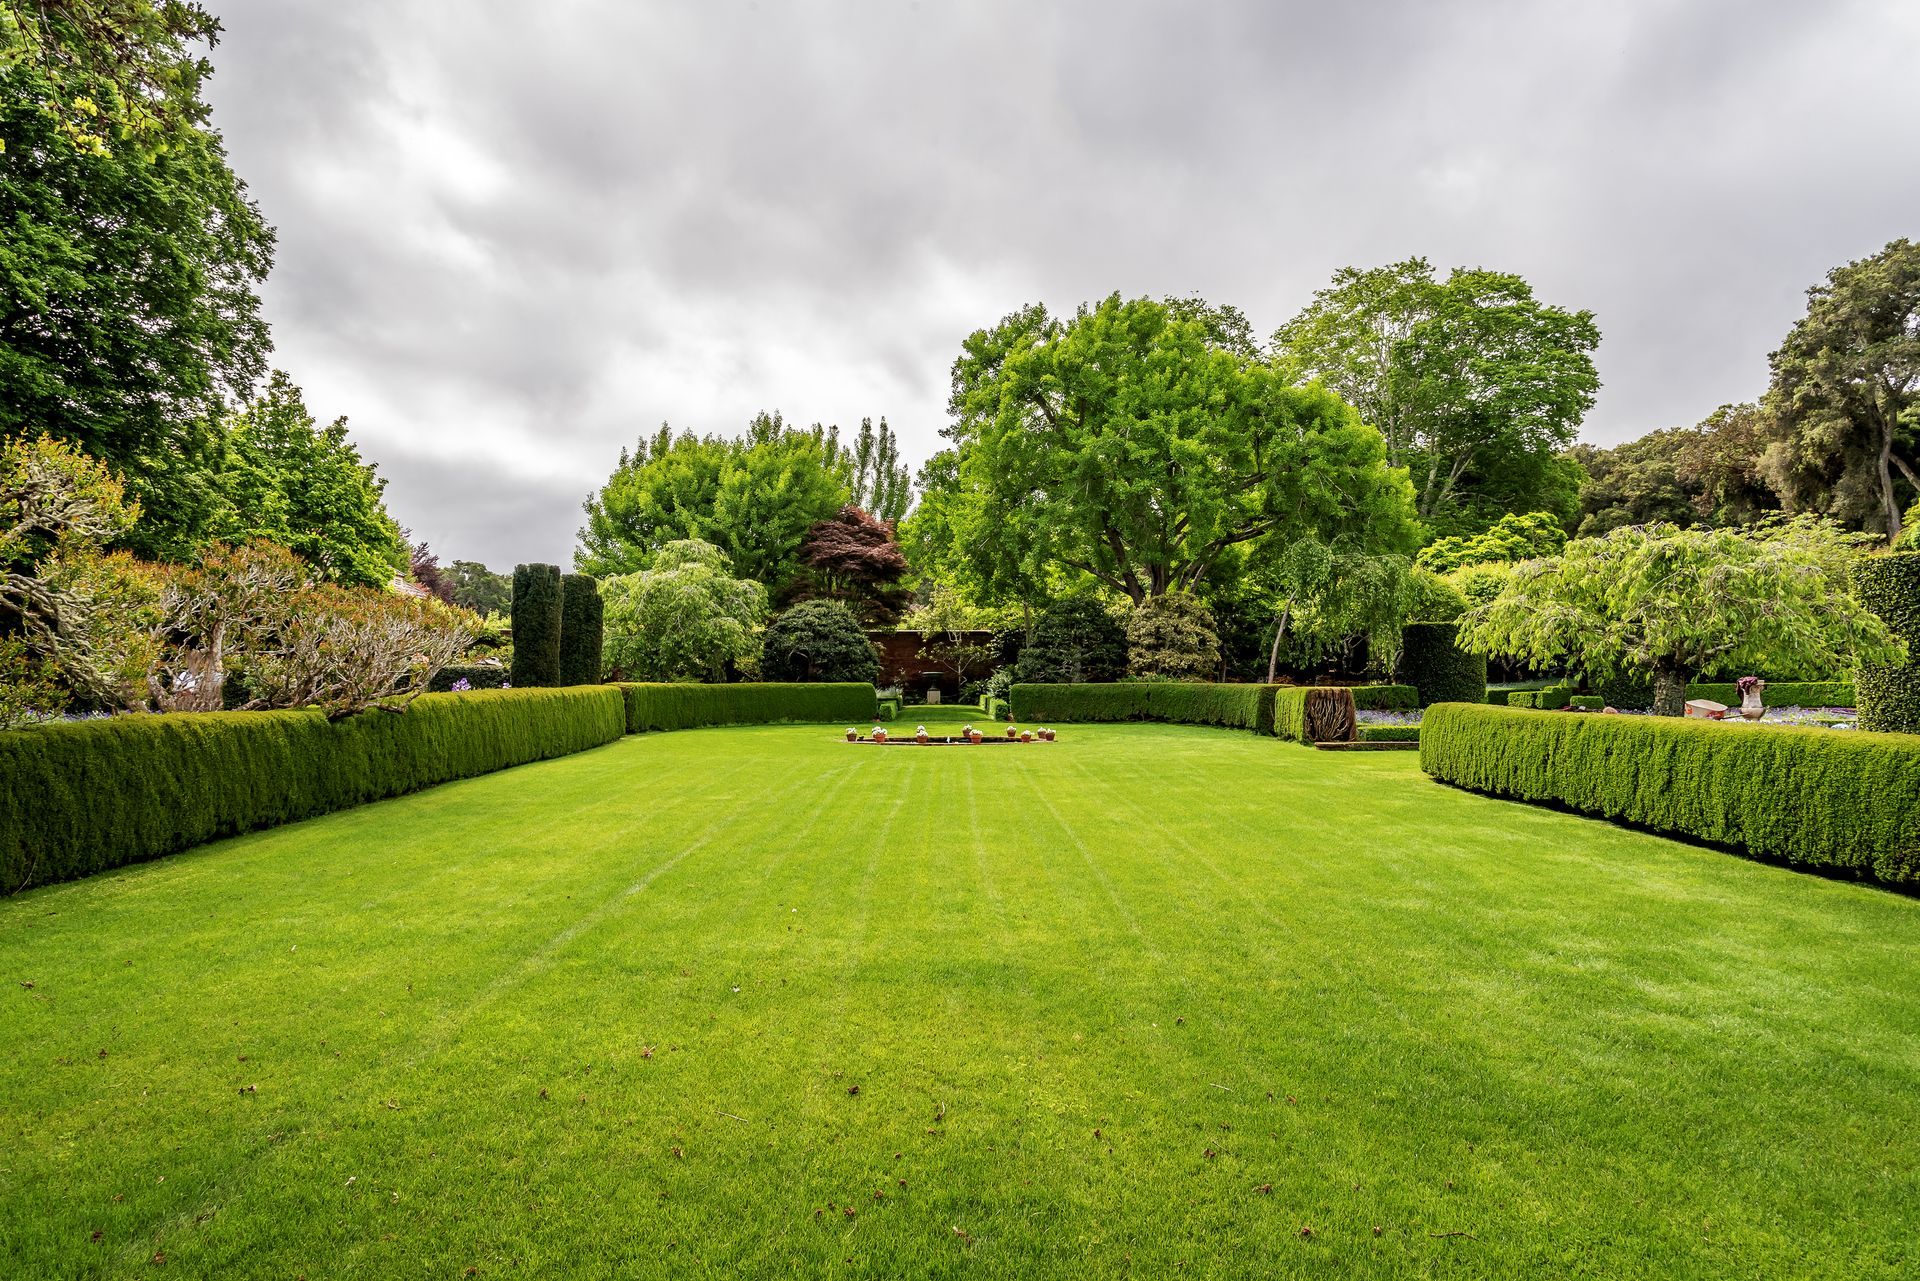 a lush green lawn surrounded by trees and bushes on a cloudy day .